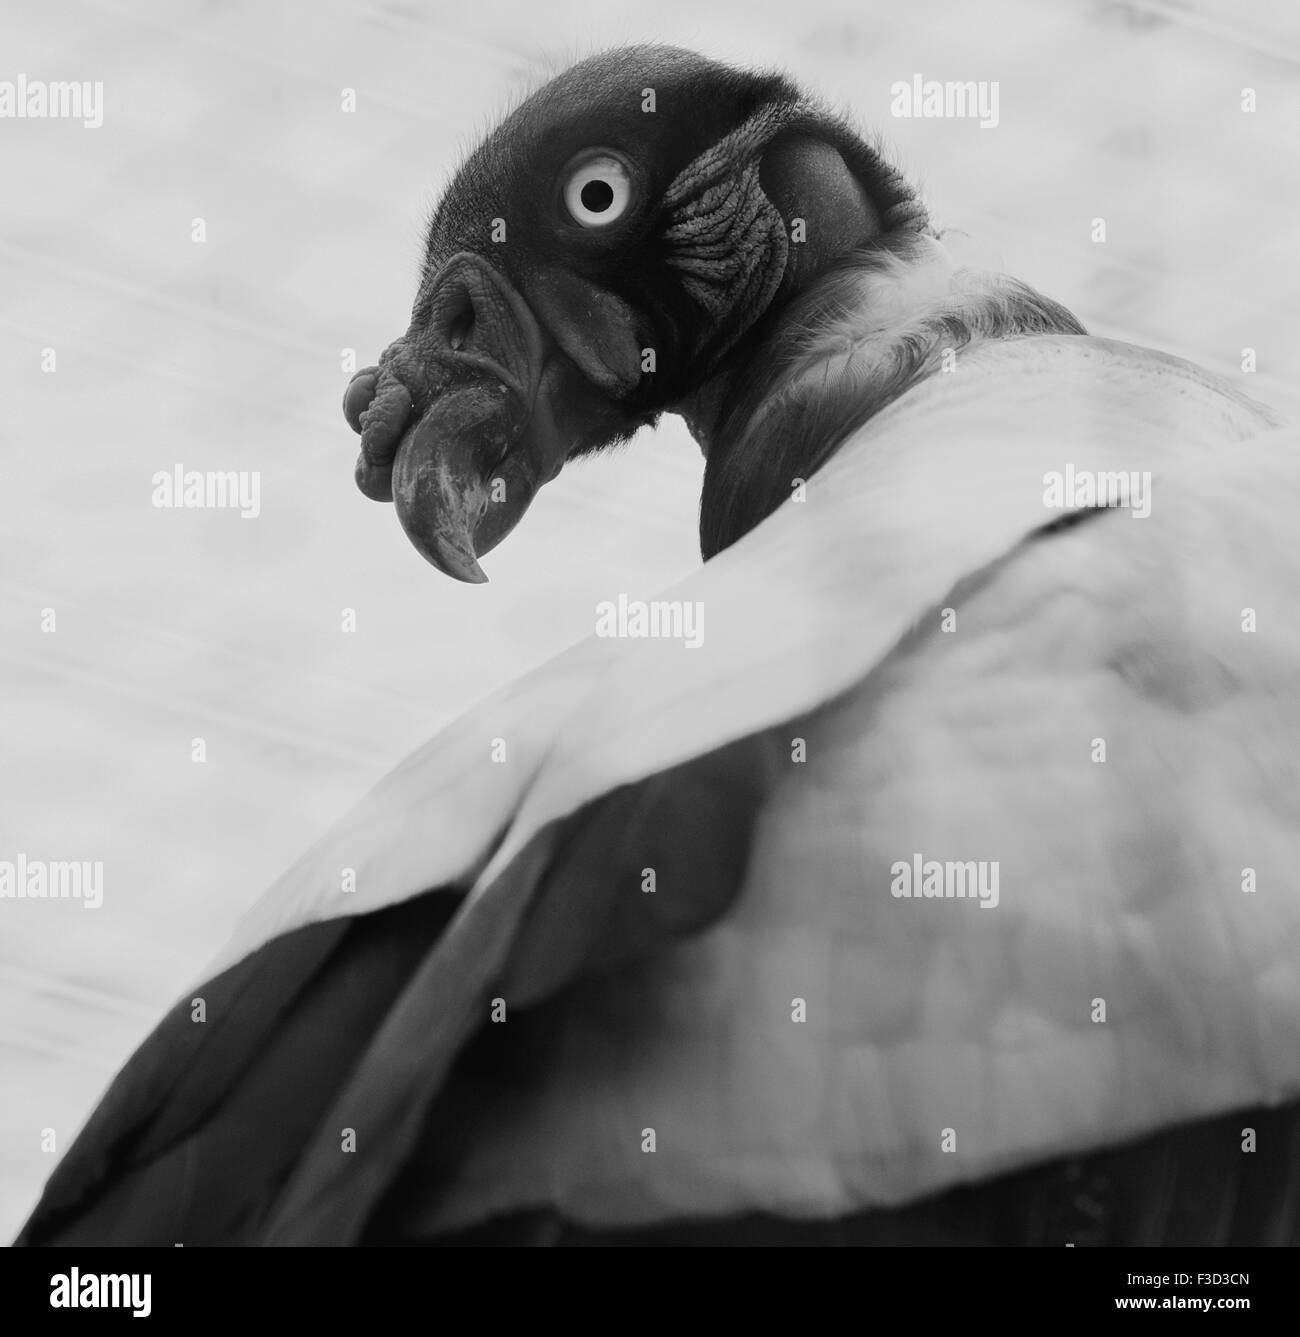 Beautiful black and white close-up of the king vulture bird Stock Photo